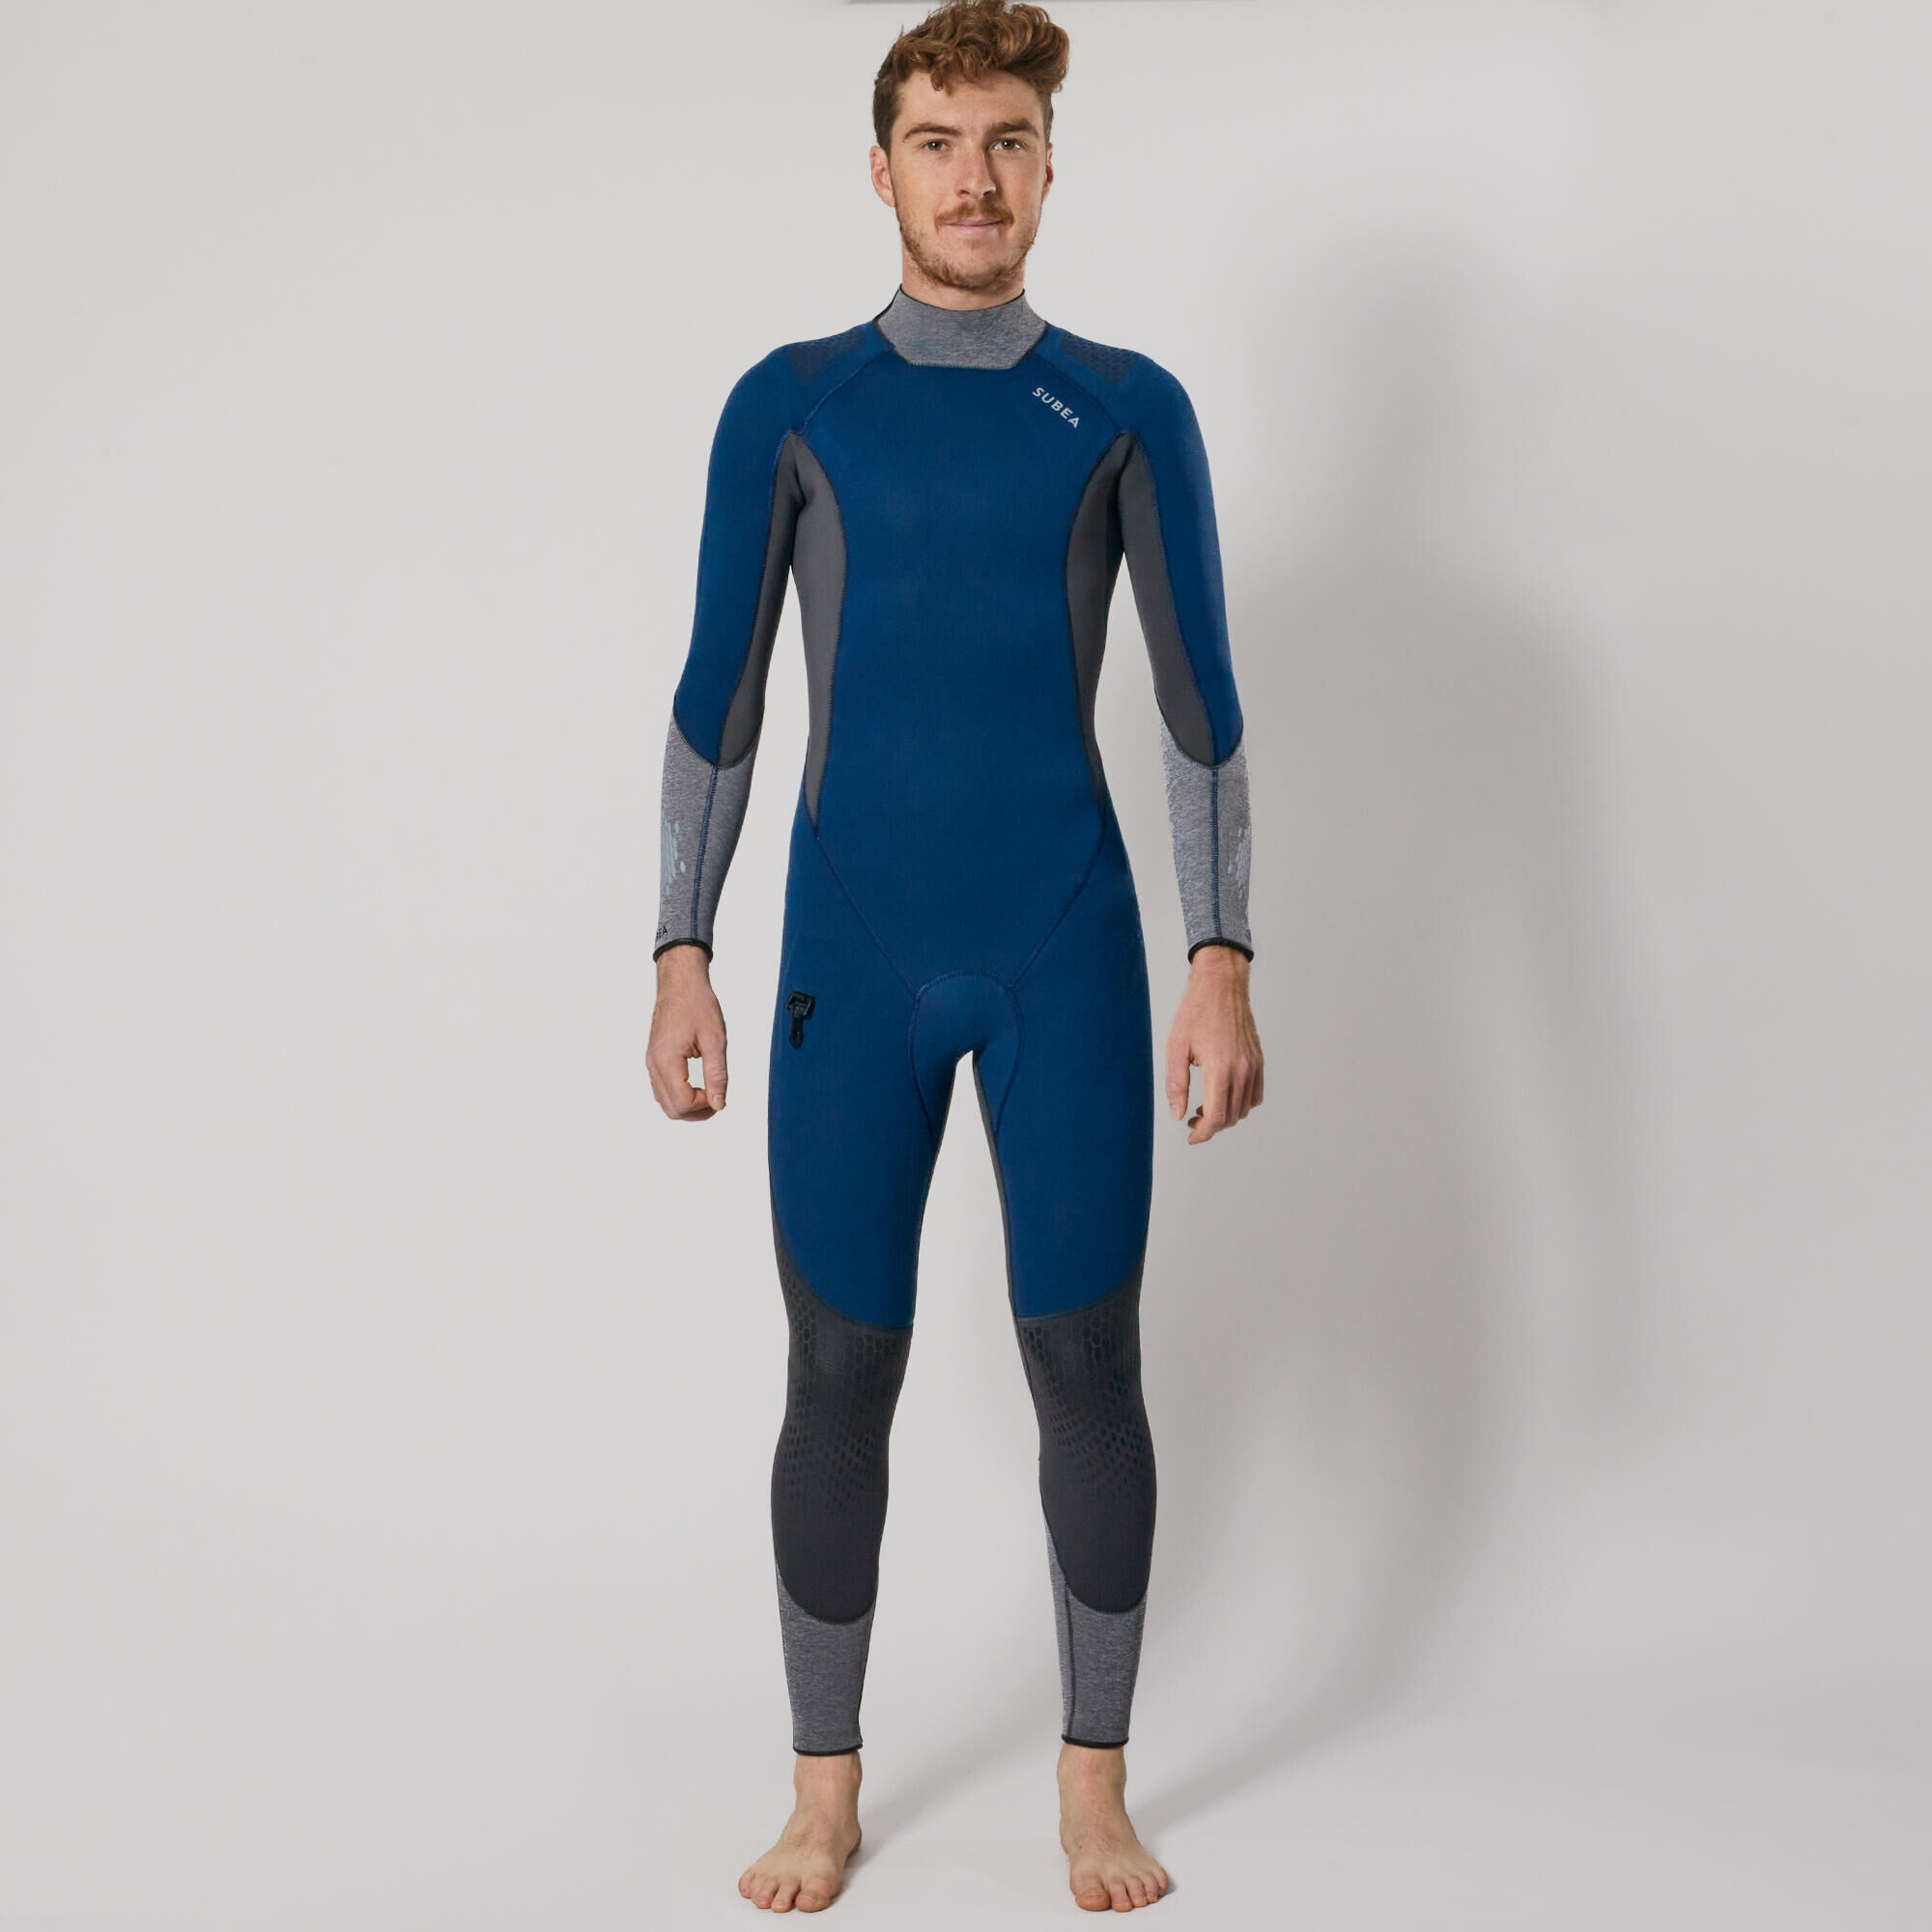 SUBEA Men's diving wetsuit 3 mm neoprene SCD 900 blue and grey